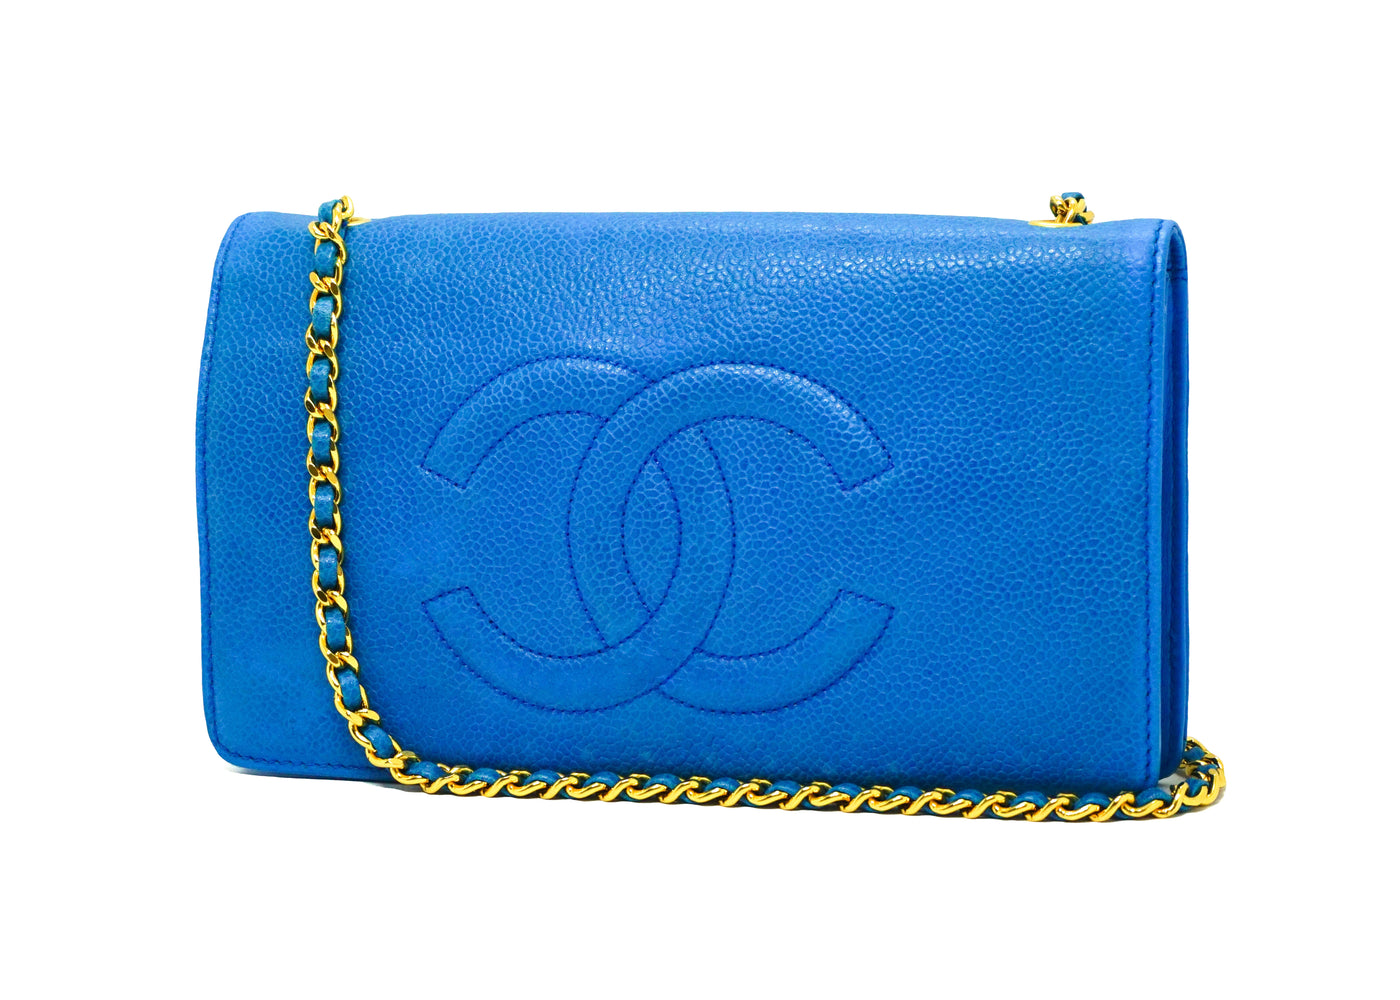 Chanel Teal Blue Quilted Patent Leather WOC Clutch Chanel